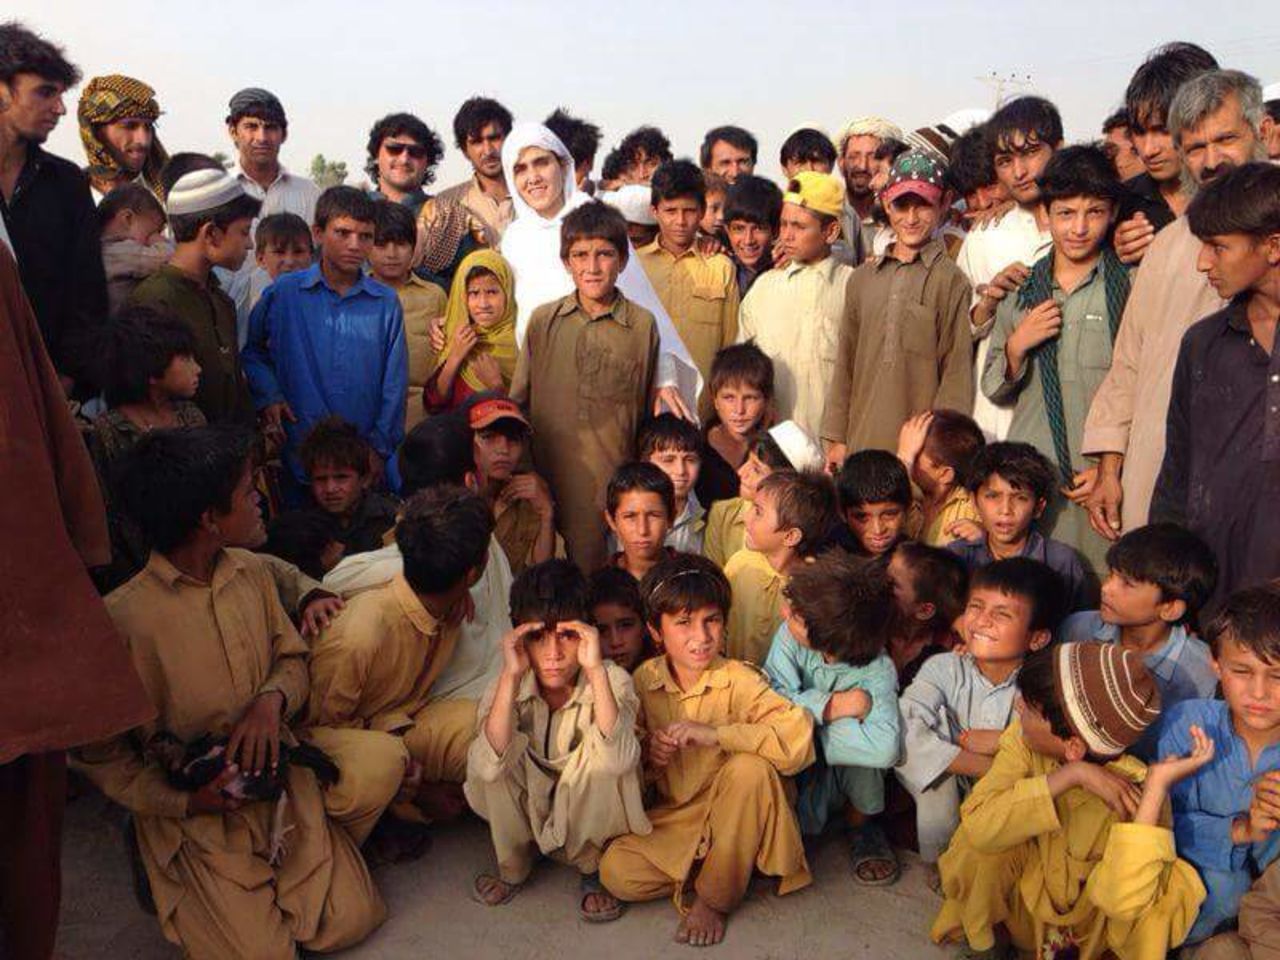 Maria Toorpakai standing among Pashtun children evacuated from their tribal land due to tensions between the army and extremist factions. She organized a special squash event in Islamabad that brought all the displaced children over in hired buses. 